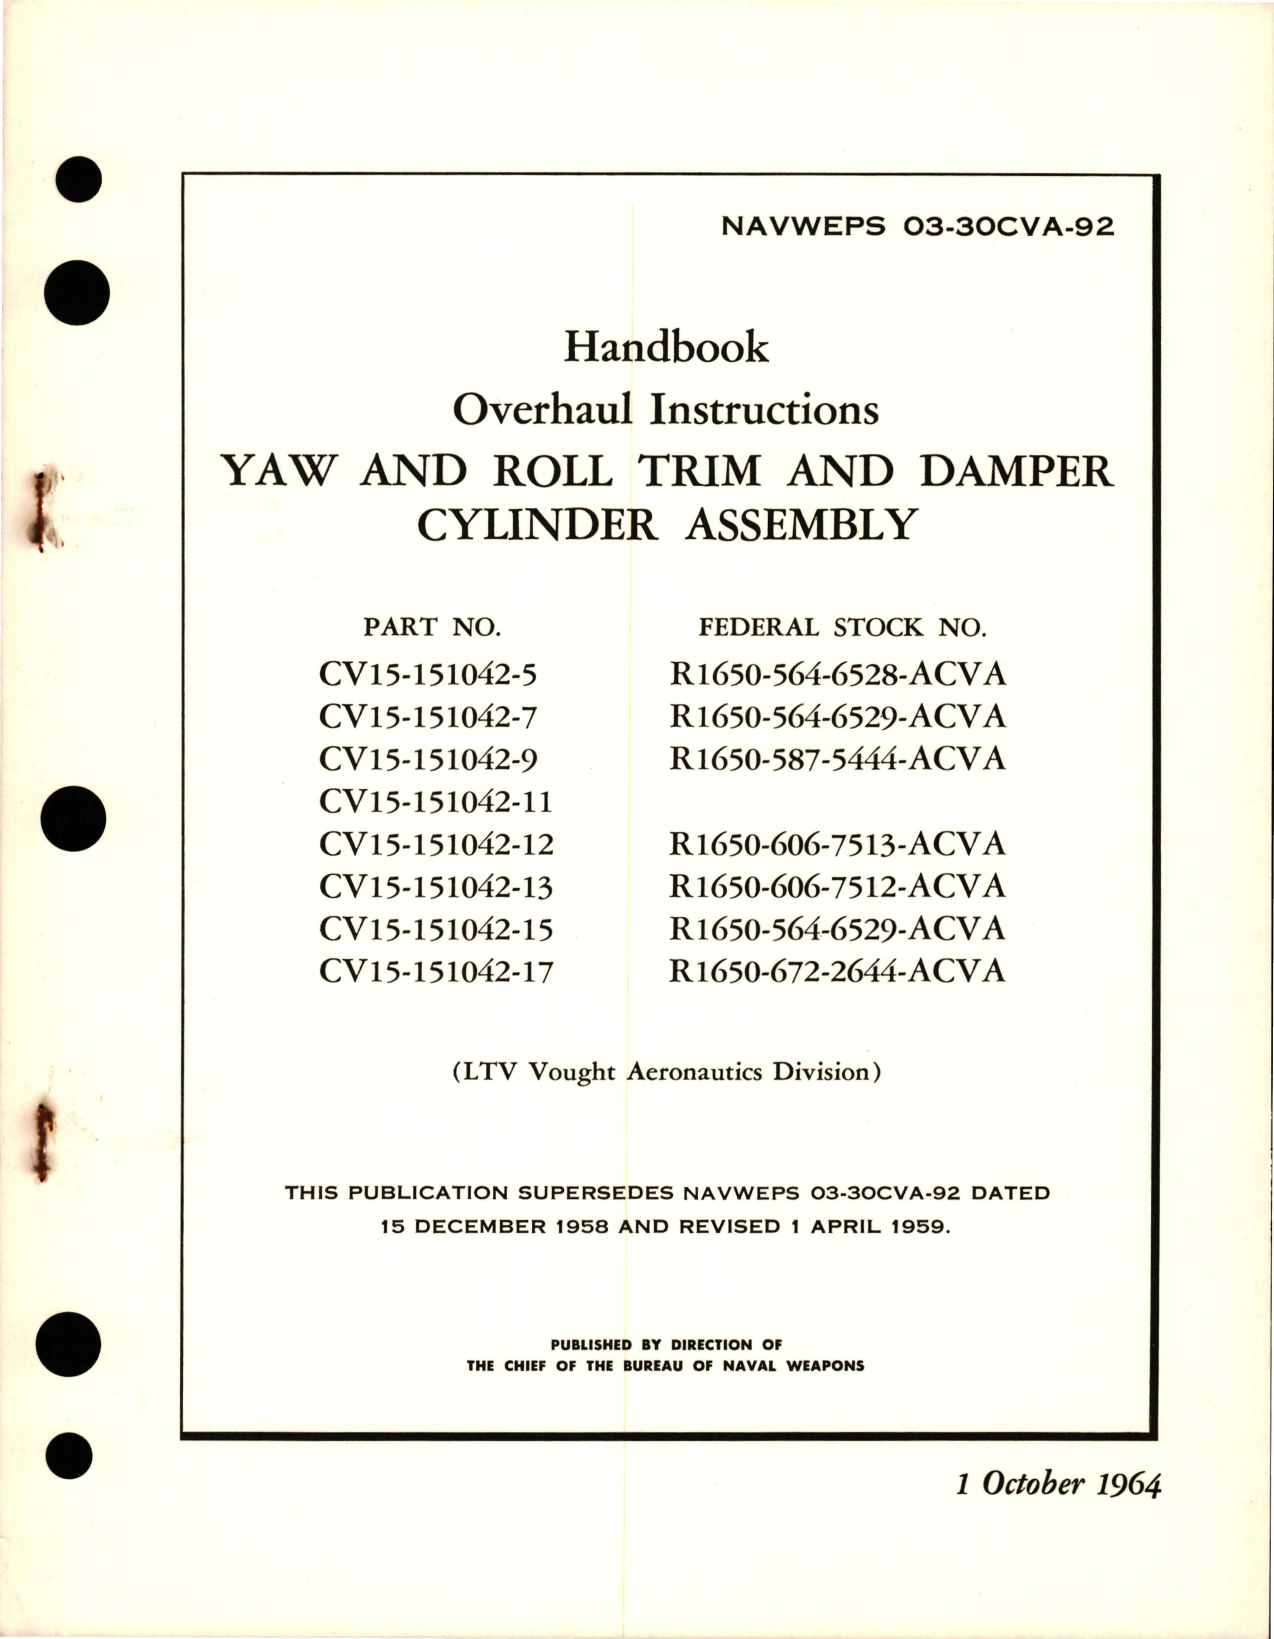 Sample page 1 from AirCorps Library document: Overhaul Instructions for Yaw and Roll Trim and Damper Cylinder Assembly